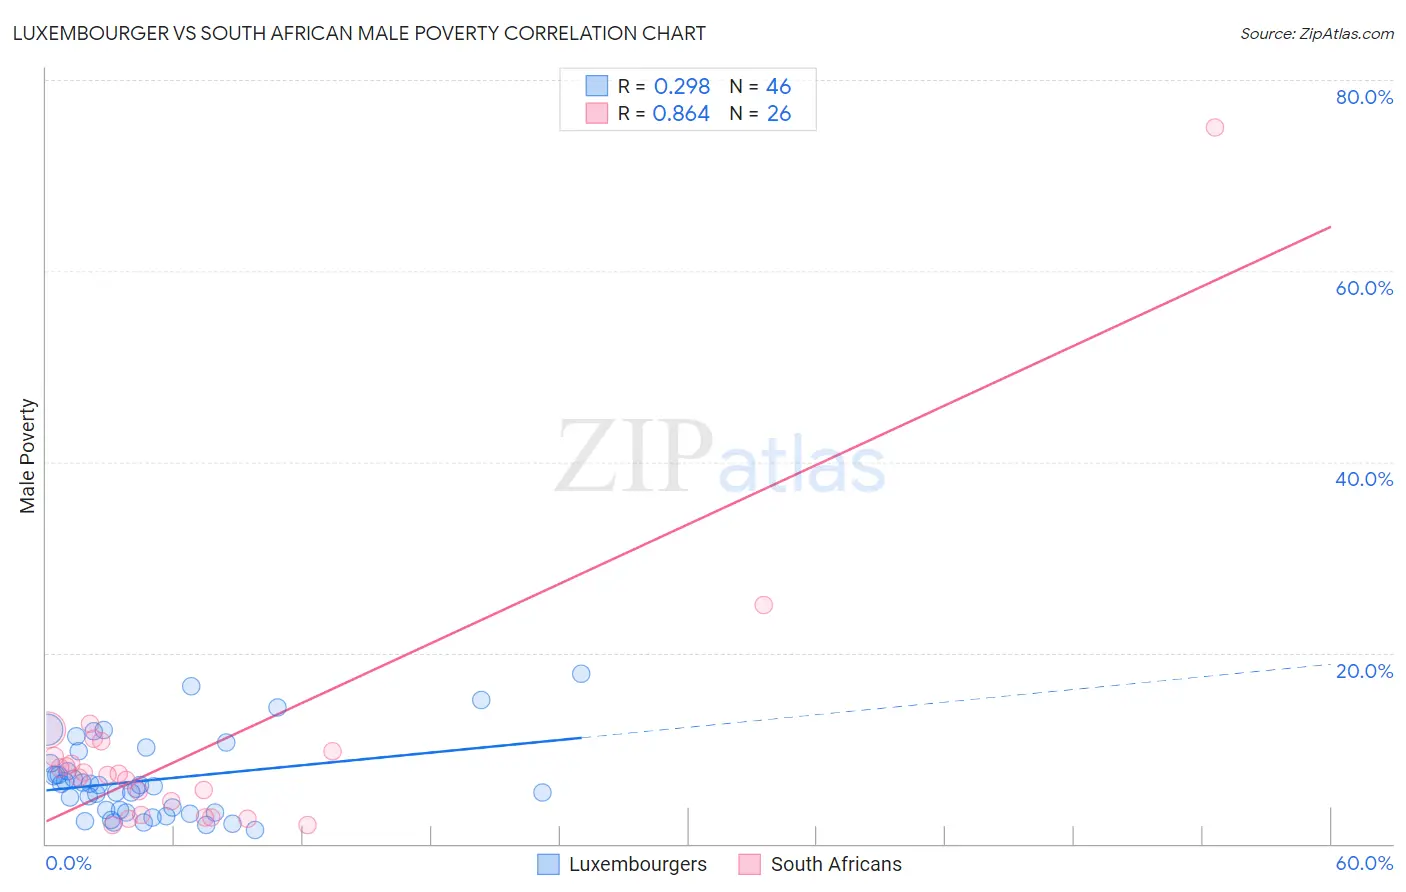 Luxembourger vs South African Male Poverty